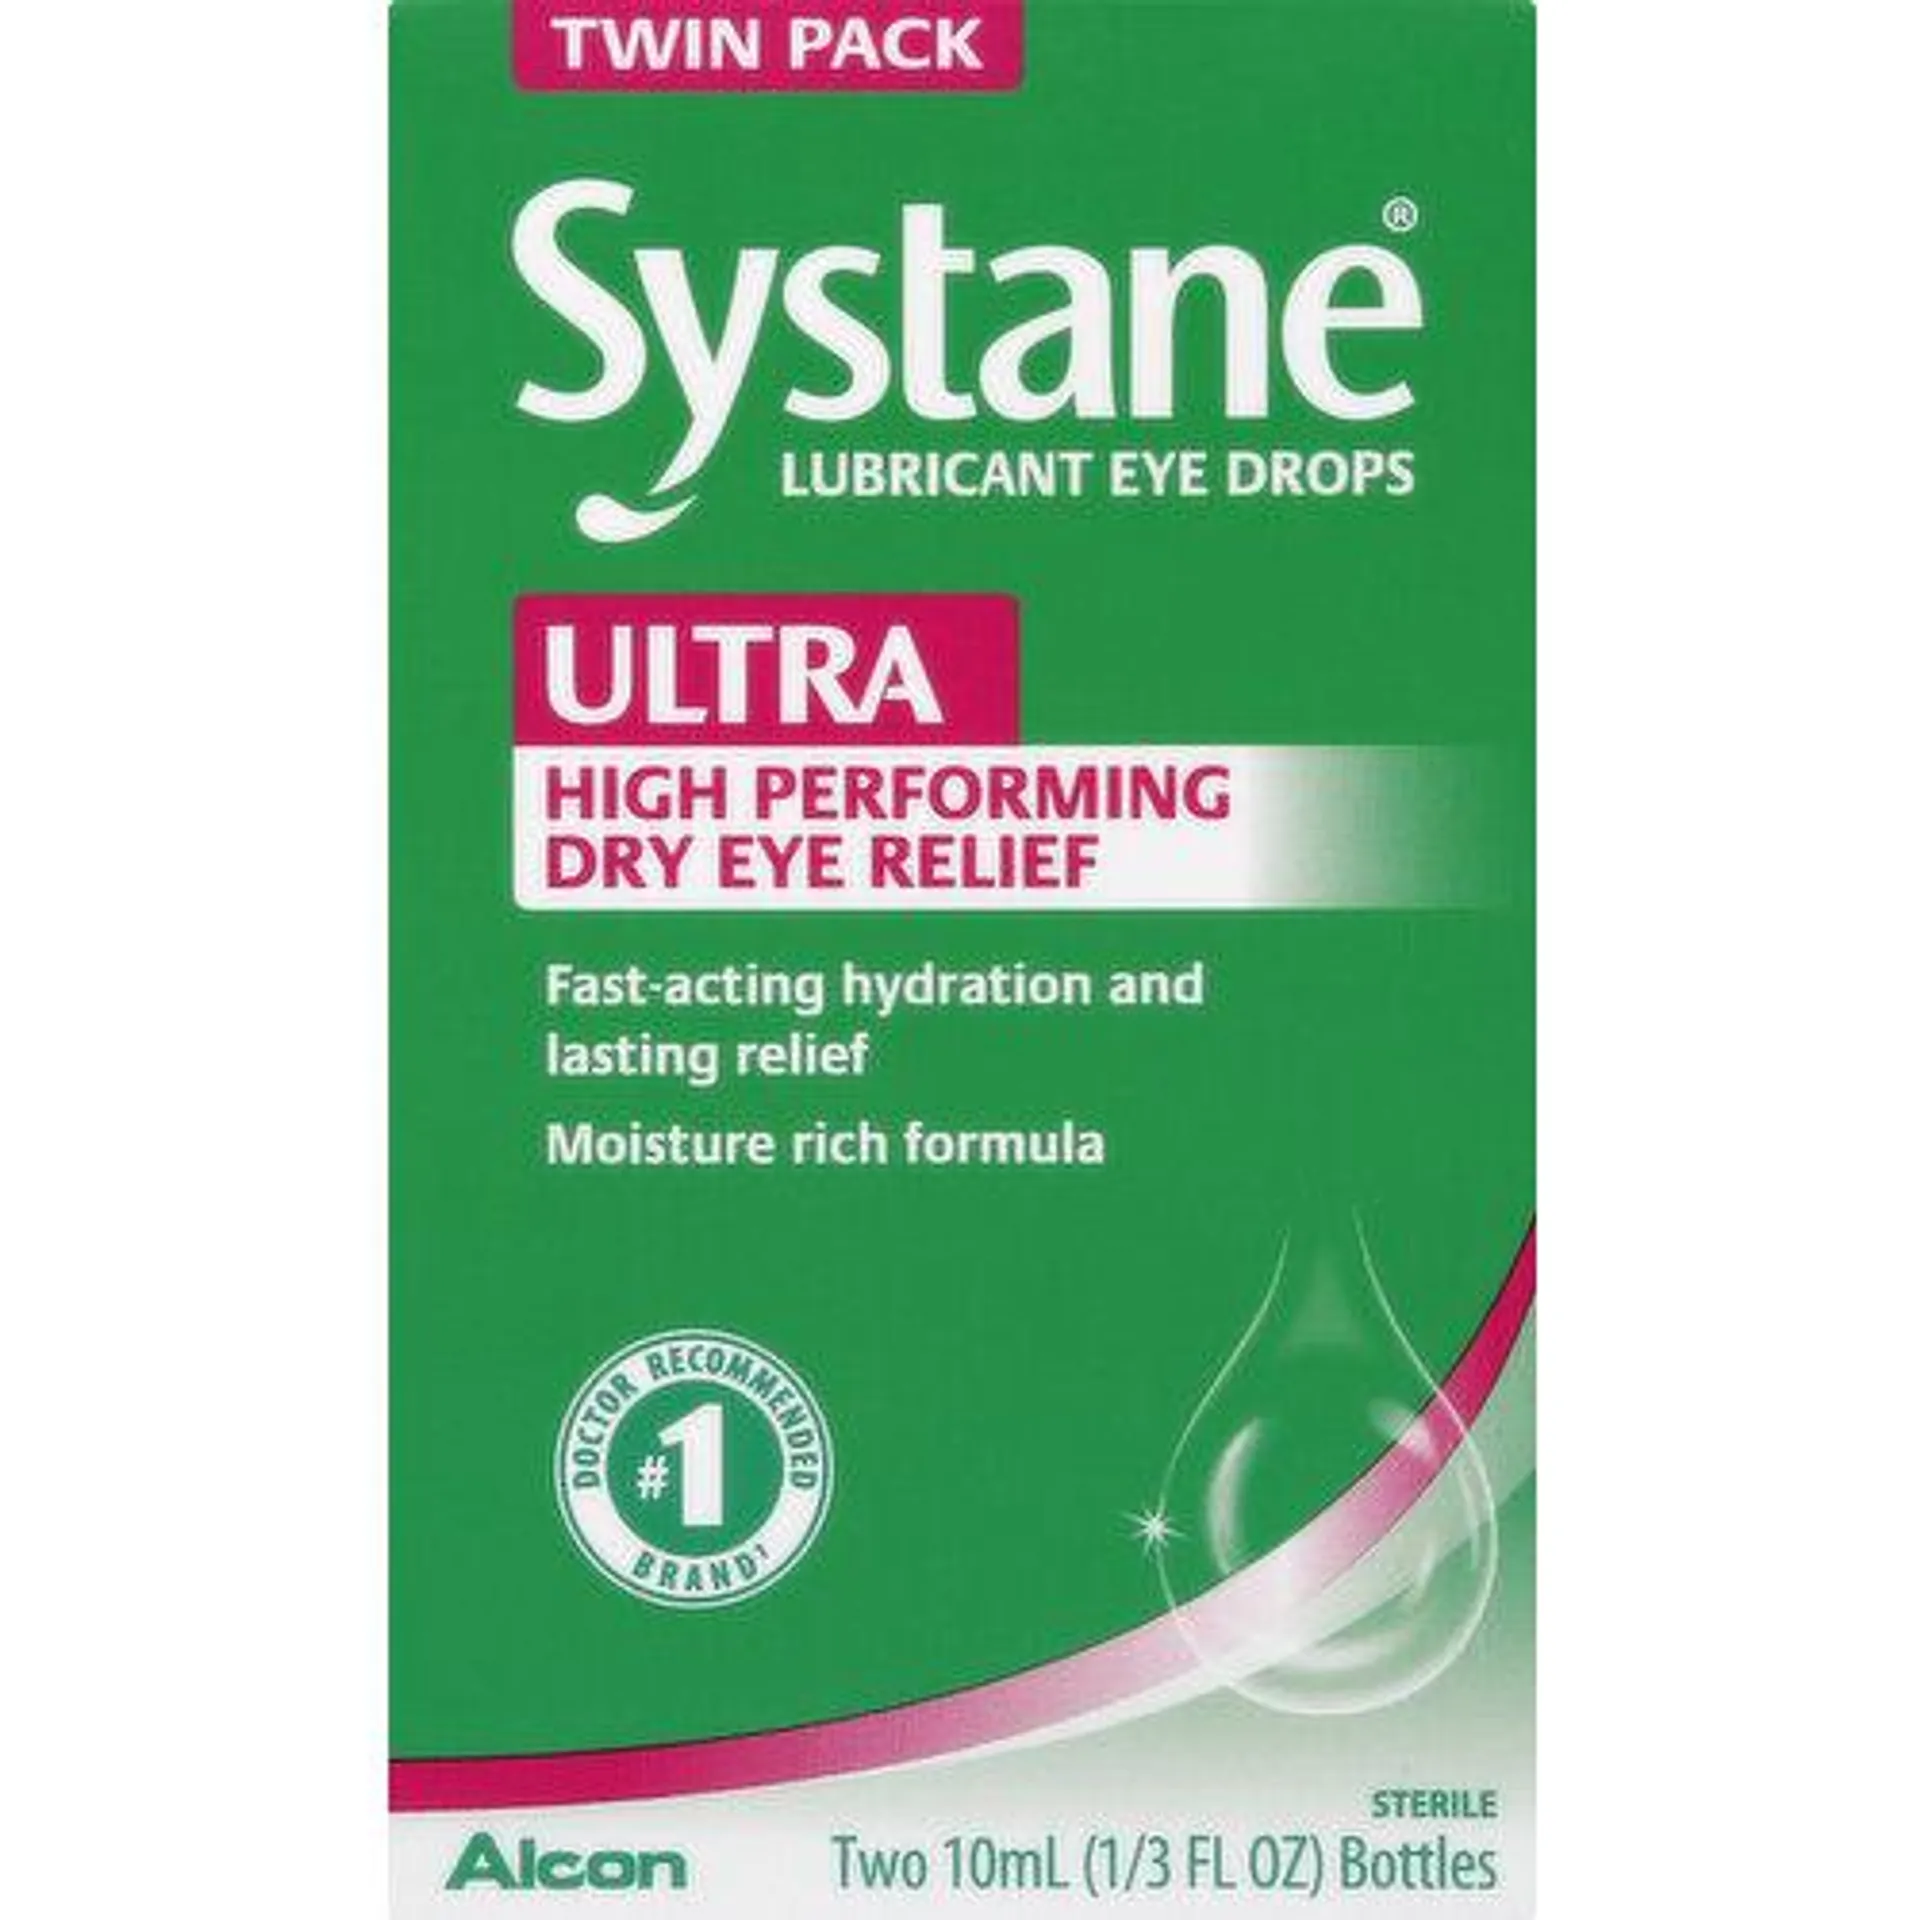 Systane Ultra Eye Drops, Lubricant, High Performance, Twin Pack, 2 Each